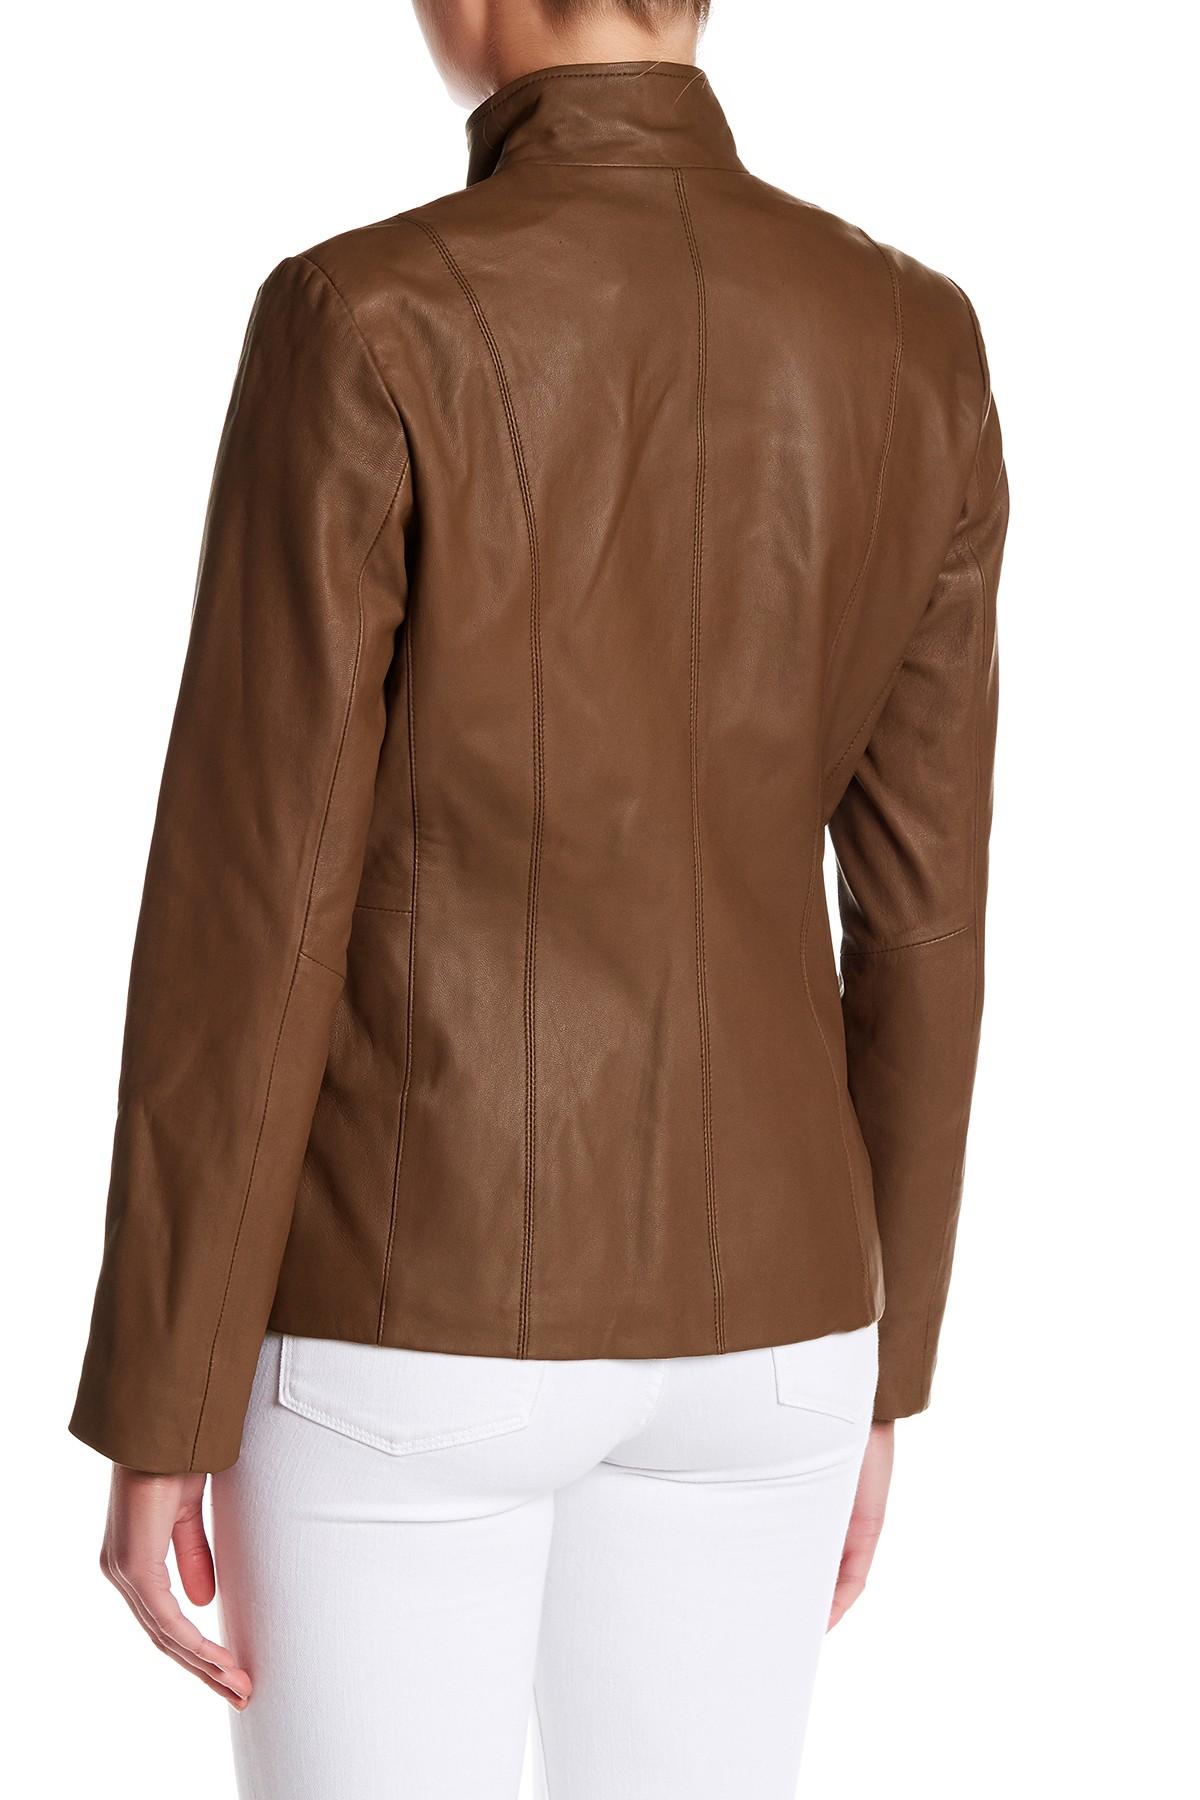 Cole Haan Genuine Leather Front Zip Wing Collar Jacket in Brown - Lyst